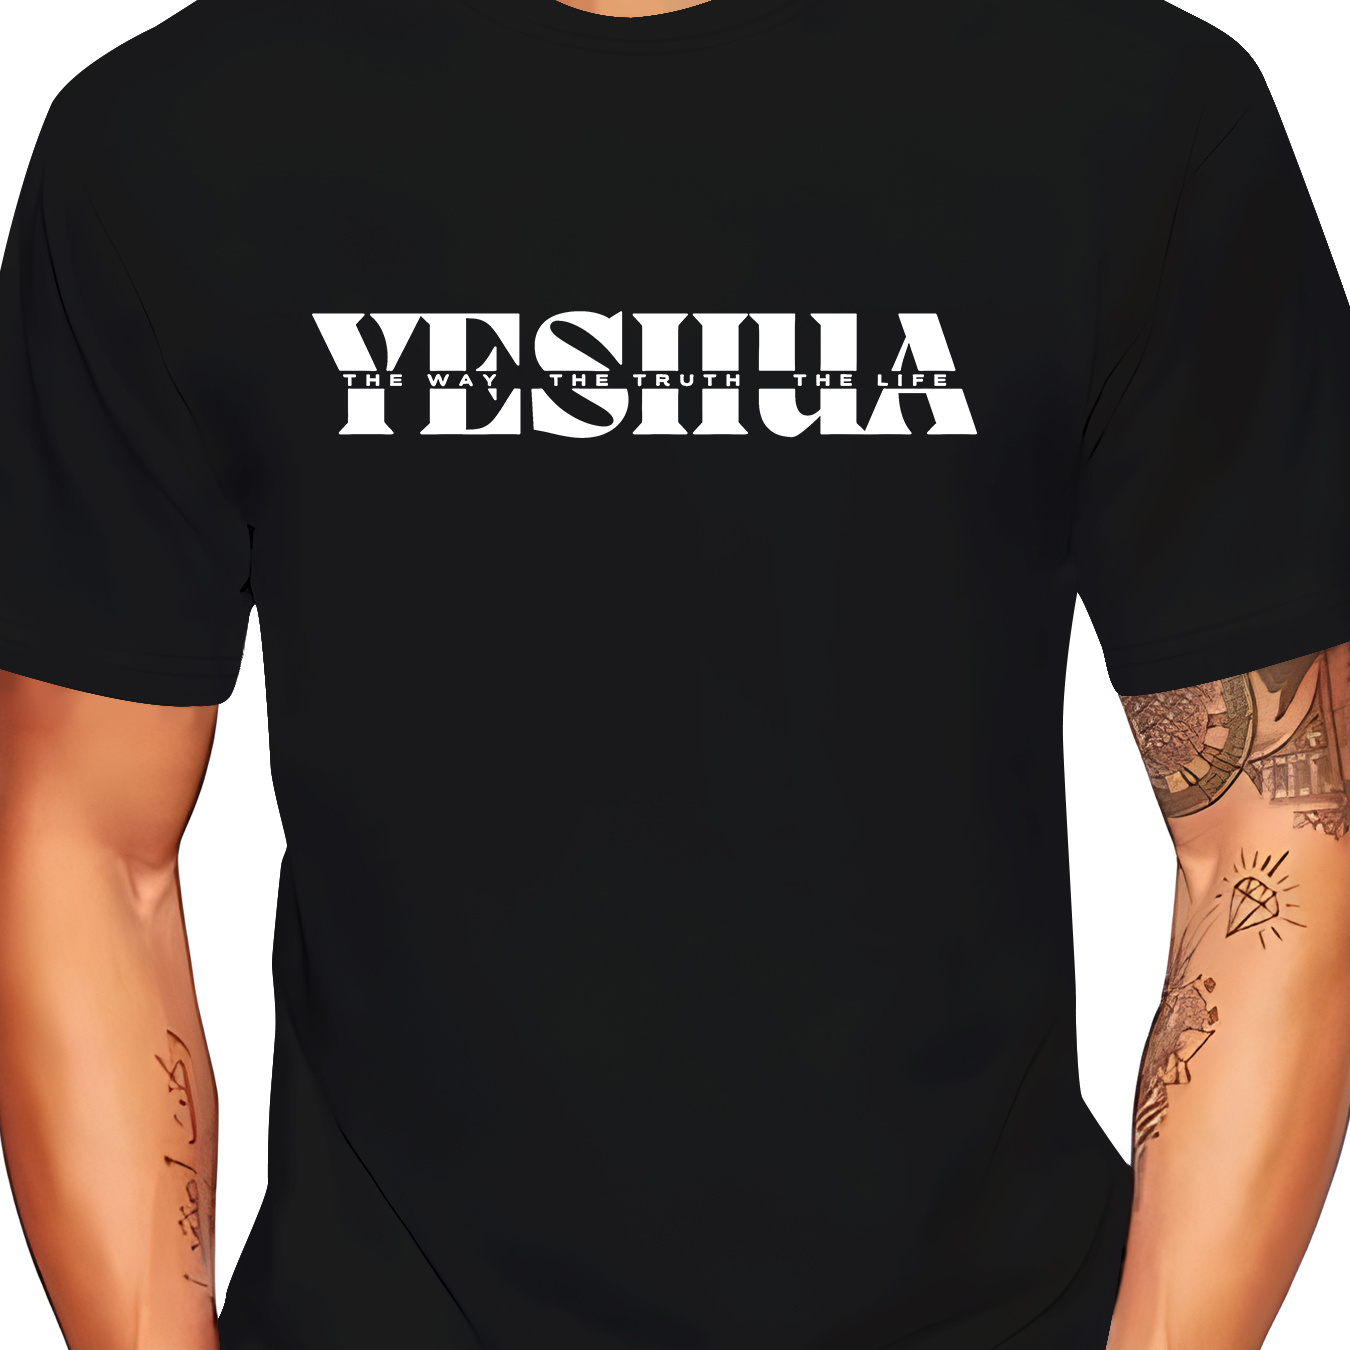 

Yeshua Print, Men's Round Crew Neck Short Sleeve, Simple Style Tee Fashion Regular Fit T-shirt, Casual Comfy Breathable Top For Spring Summer Holiday Leisure Vacation Men's Clothing As Gift